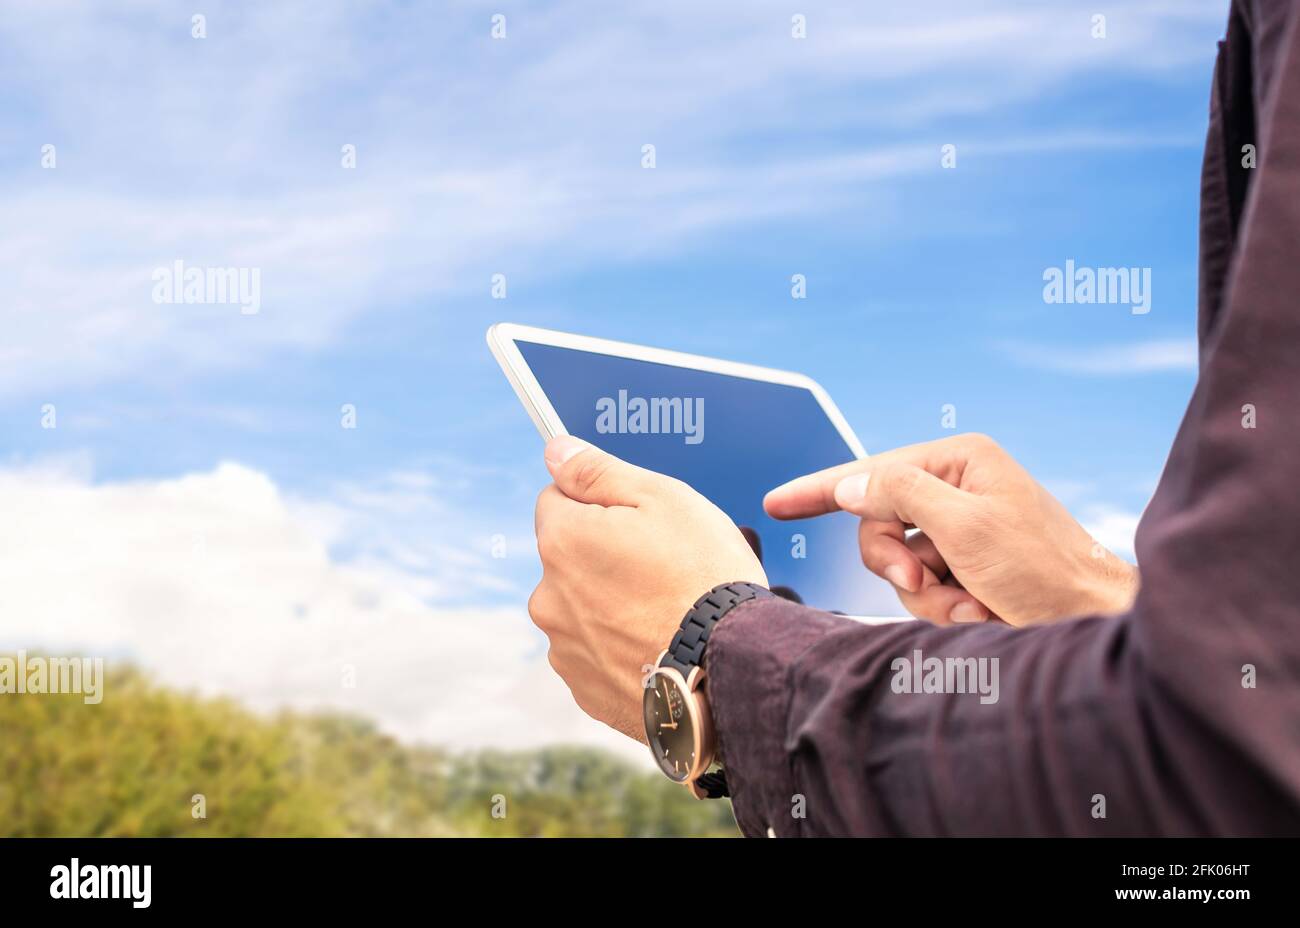 Tablet in nature outdoors. Farm or garden with blue sky and clouds. Man using smart device outside. Green grass field or park in the background. Stock Photo